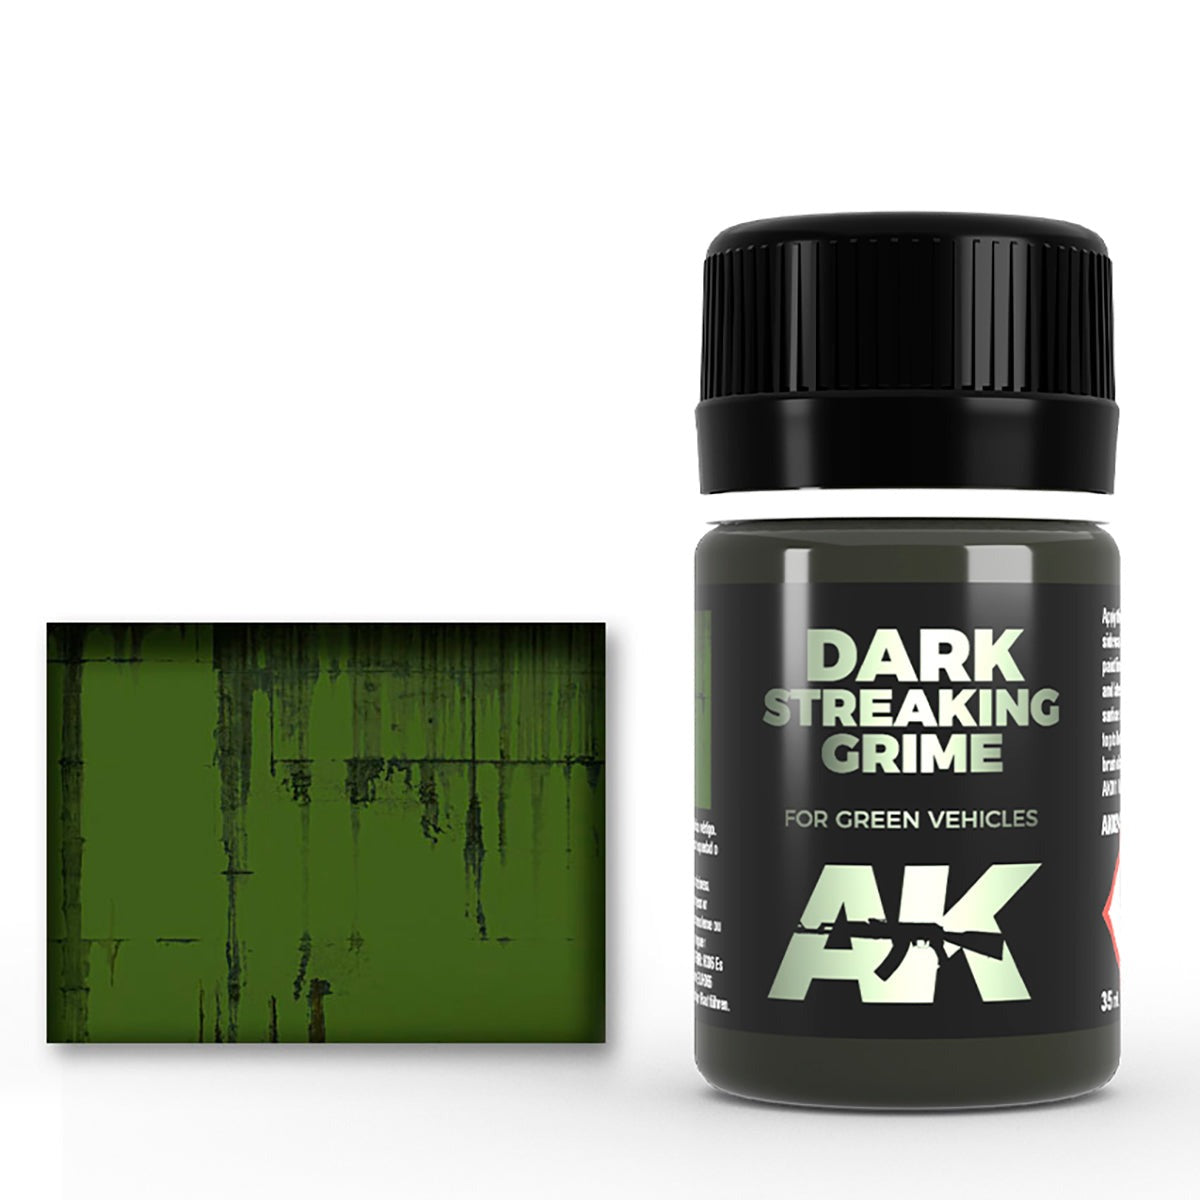 Streaking Grime for Dark Vehicles - Loaded Dice